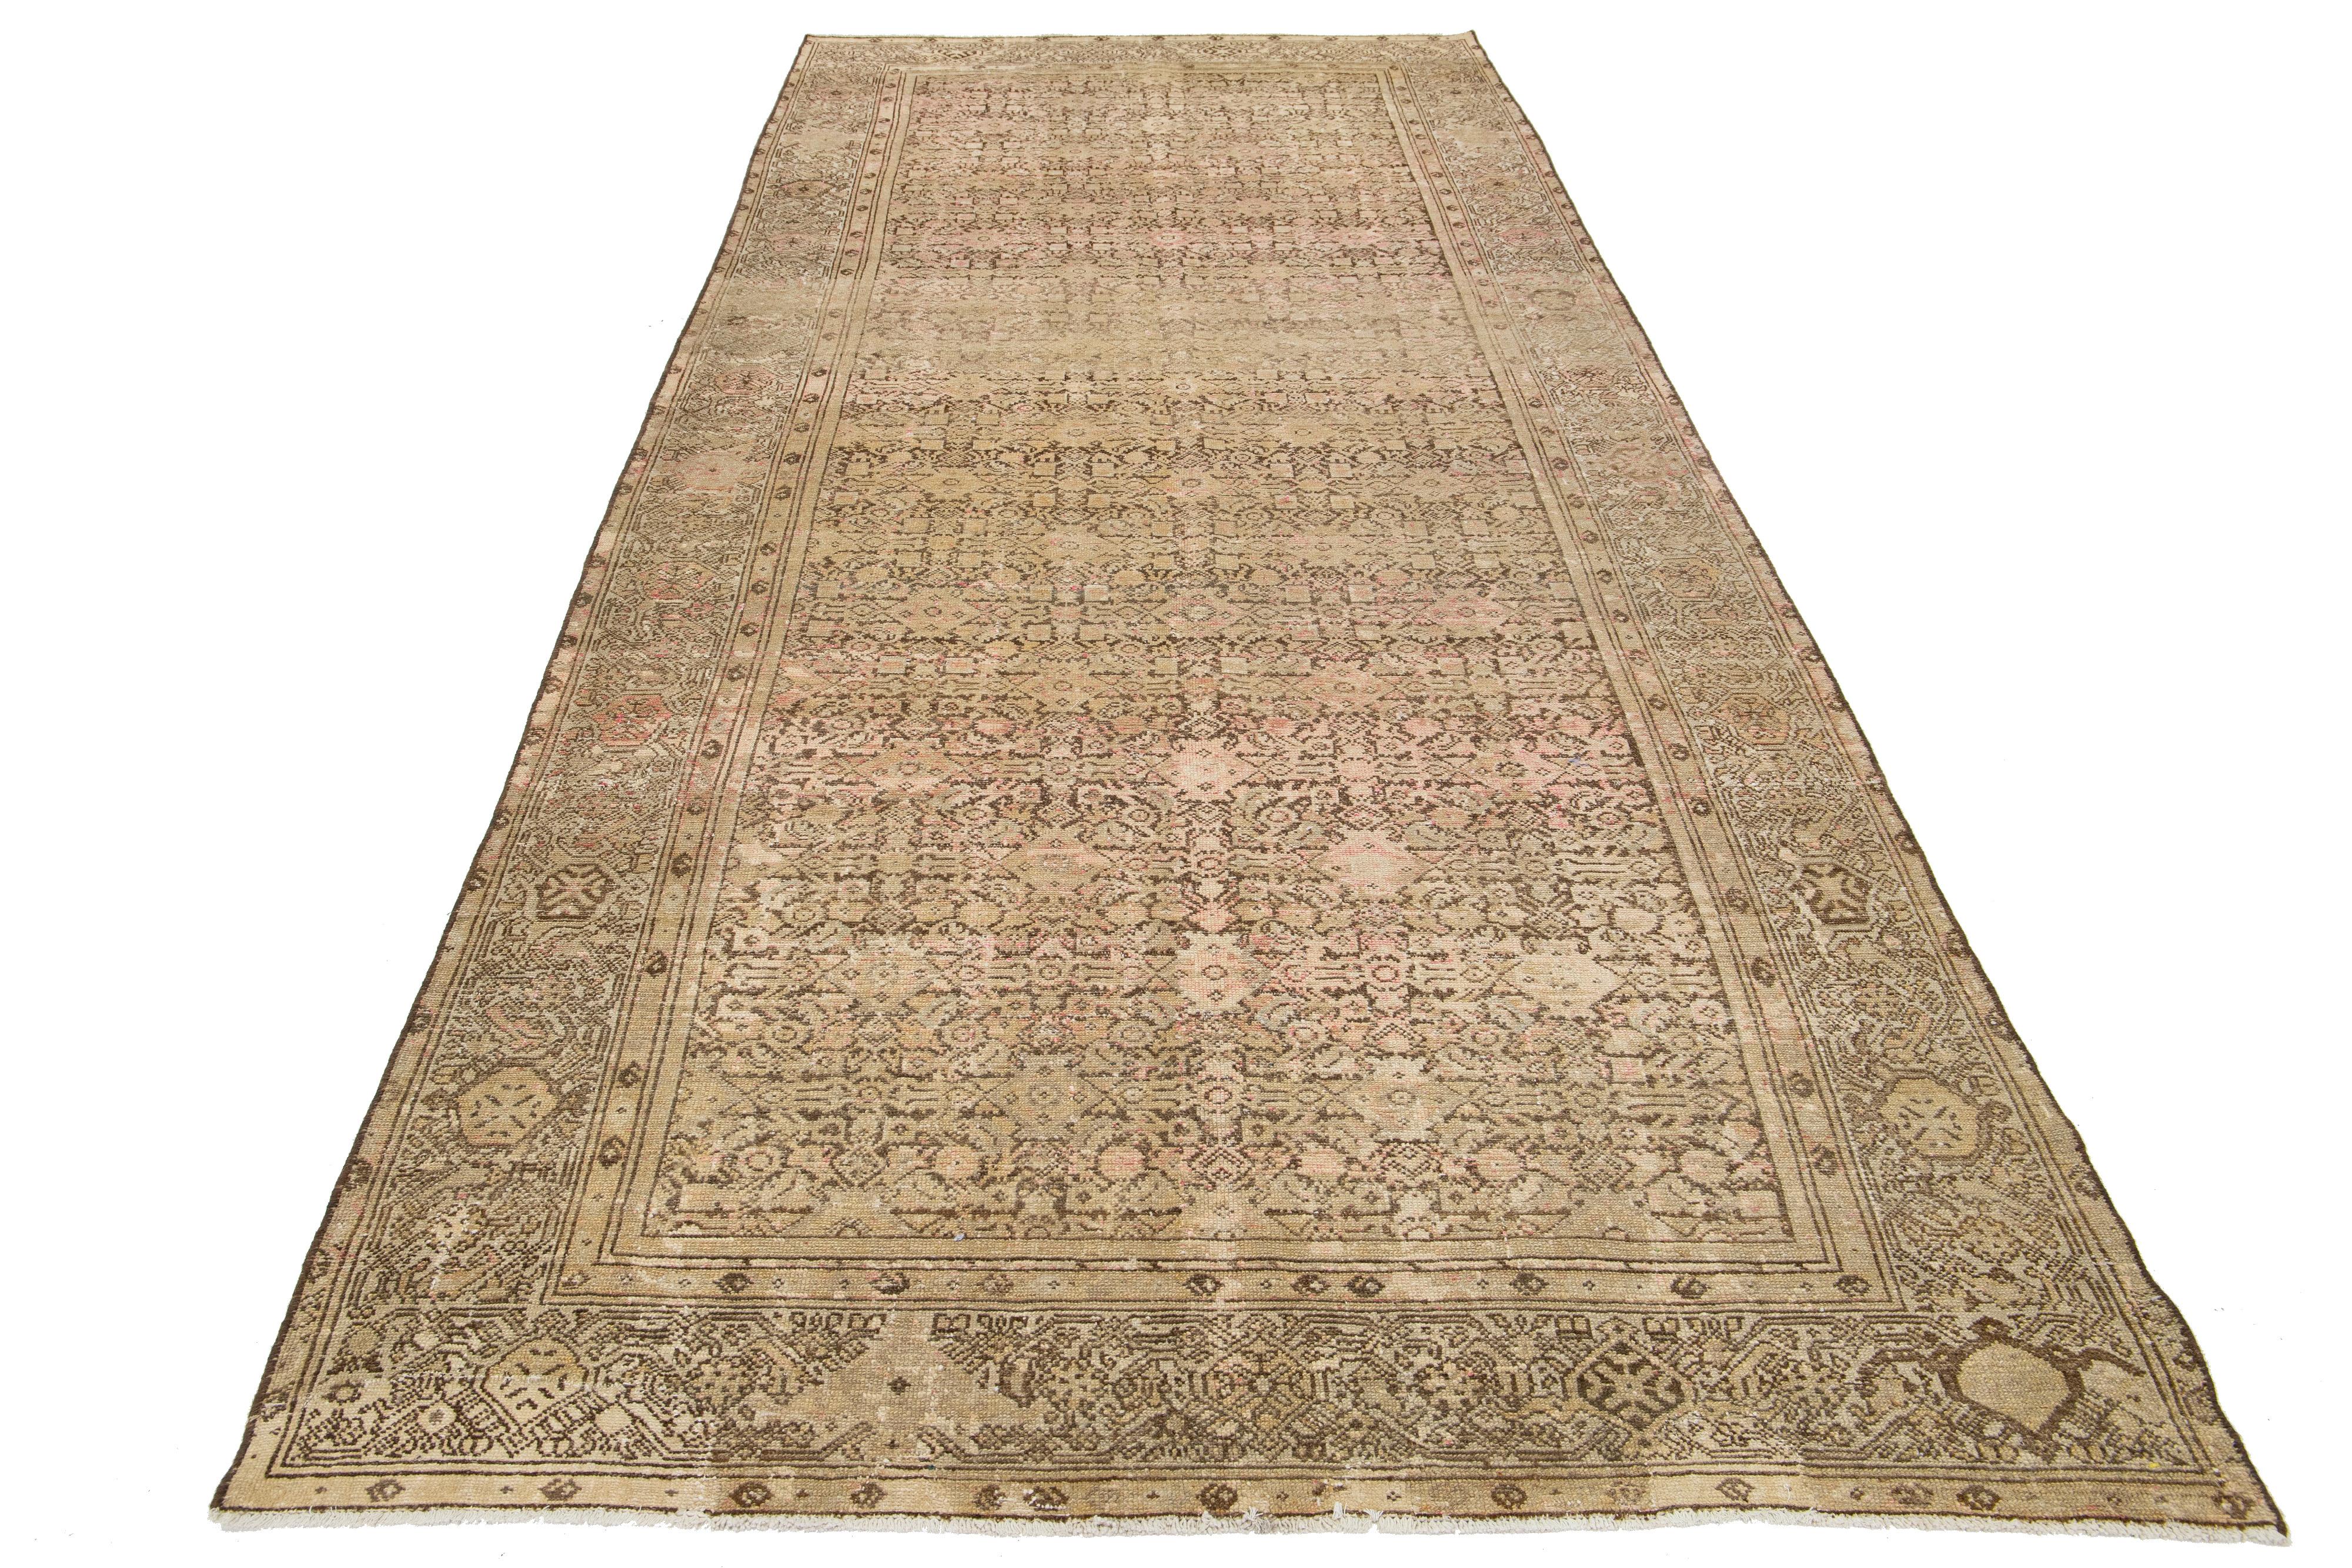 This is a handmade Persian Malayer wool rug from the 20th century. It features a beige-tan field with brown, pink, and gray accents throughout the design.

This rug measures 5'8